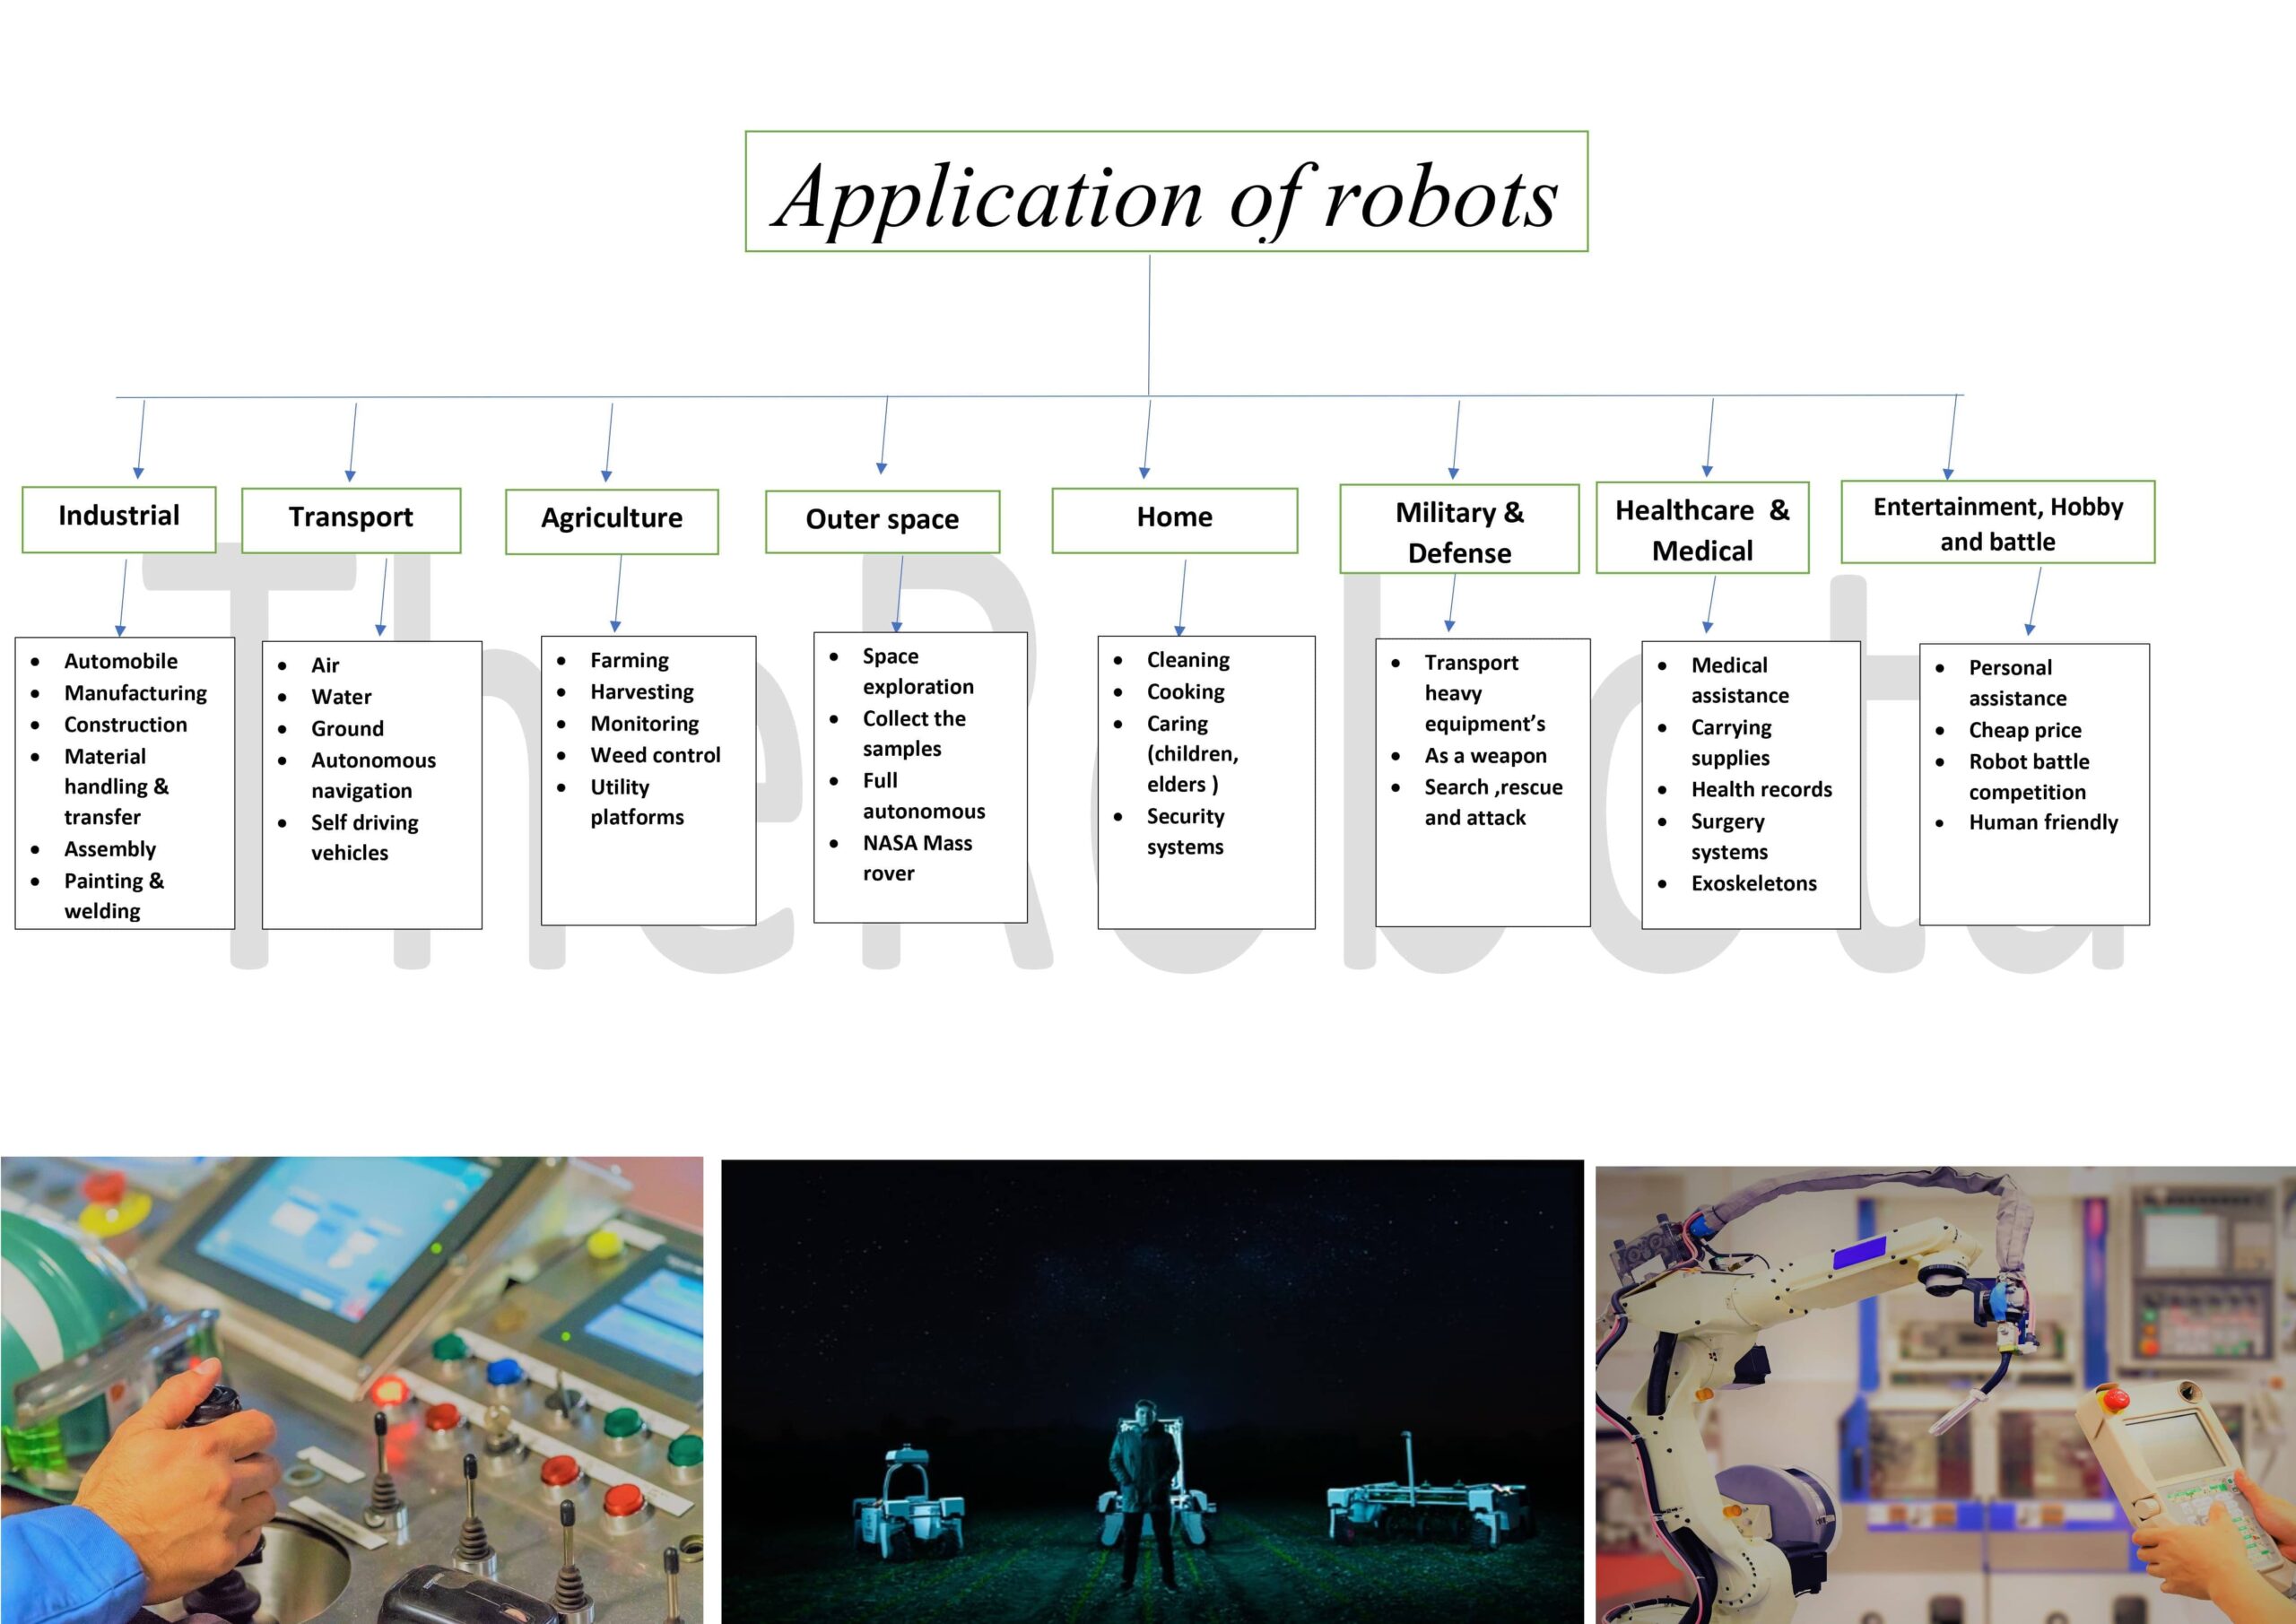 what are the application of robots